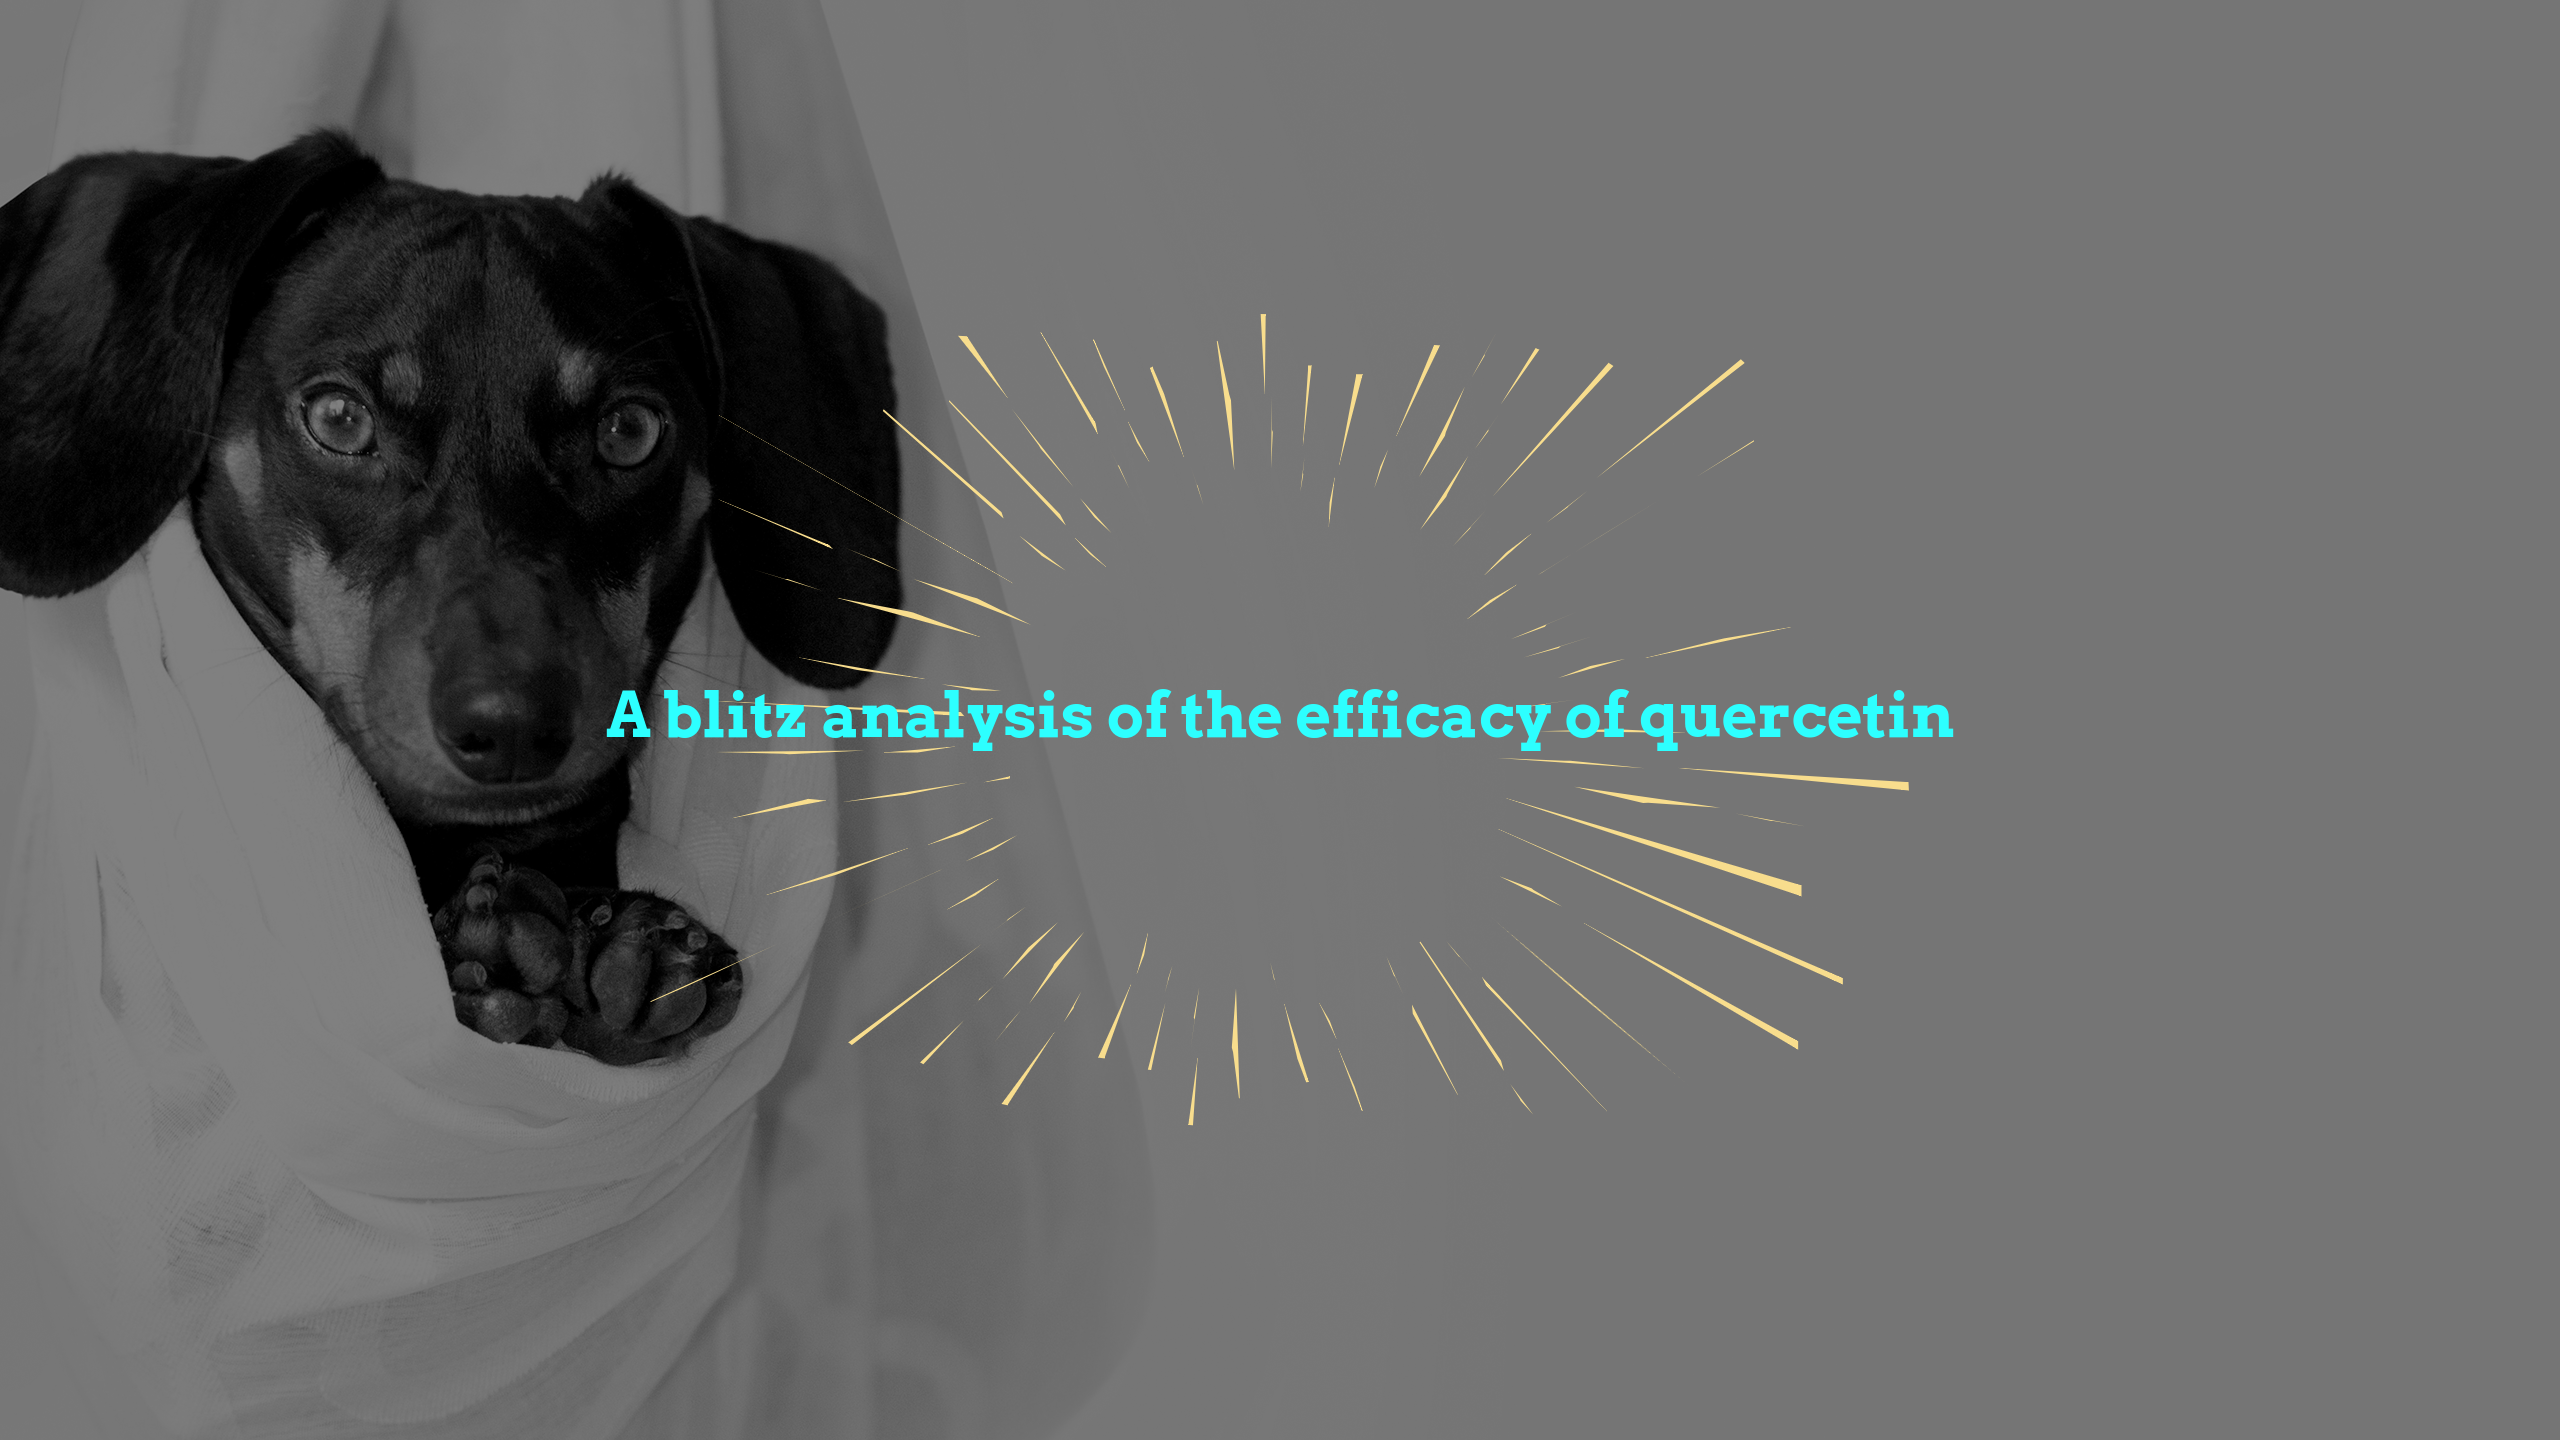 A blitz analysis of the efficacy of quercetin (Quercefit®) published in the scientific journal NATURE